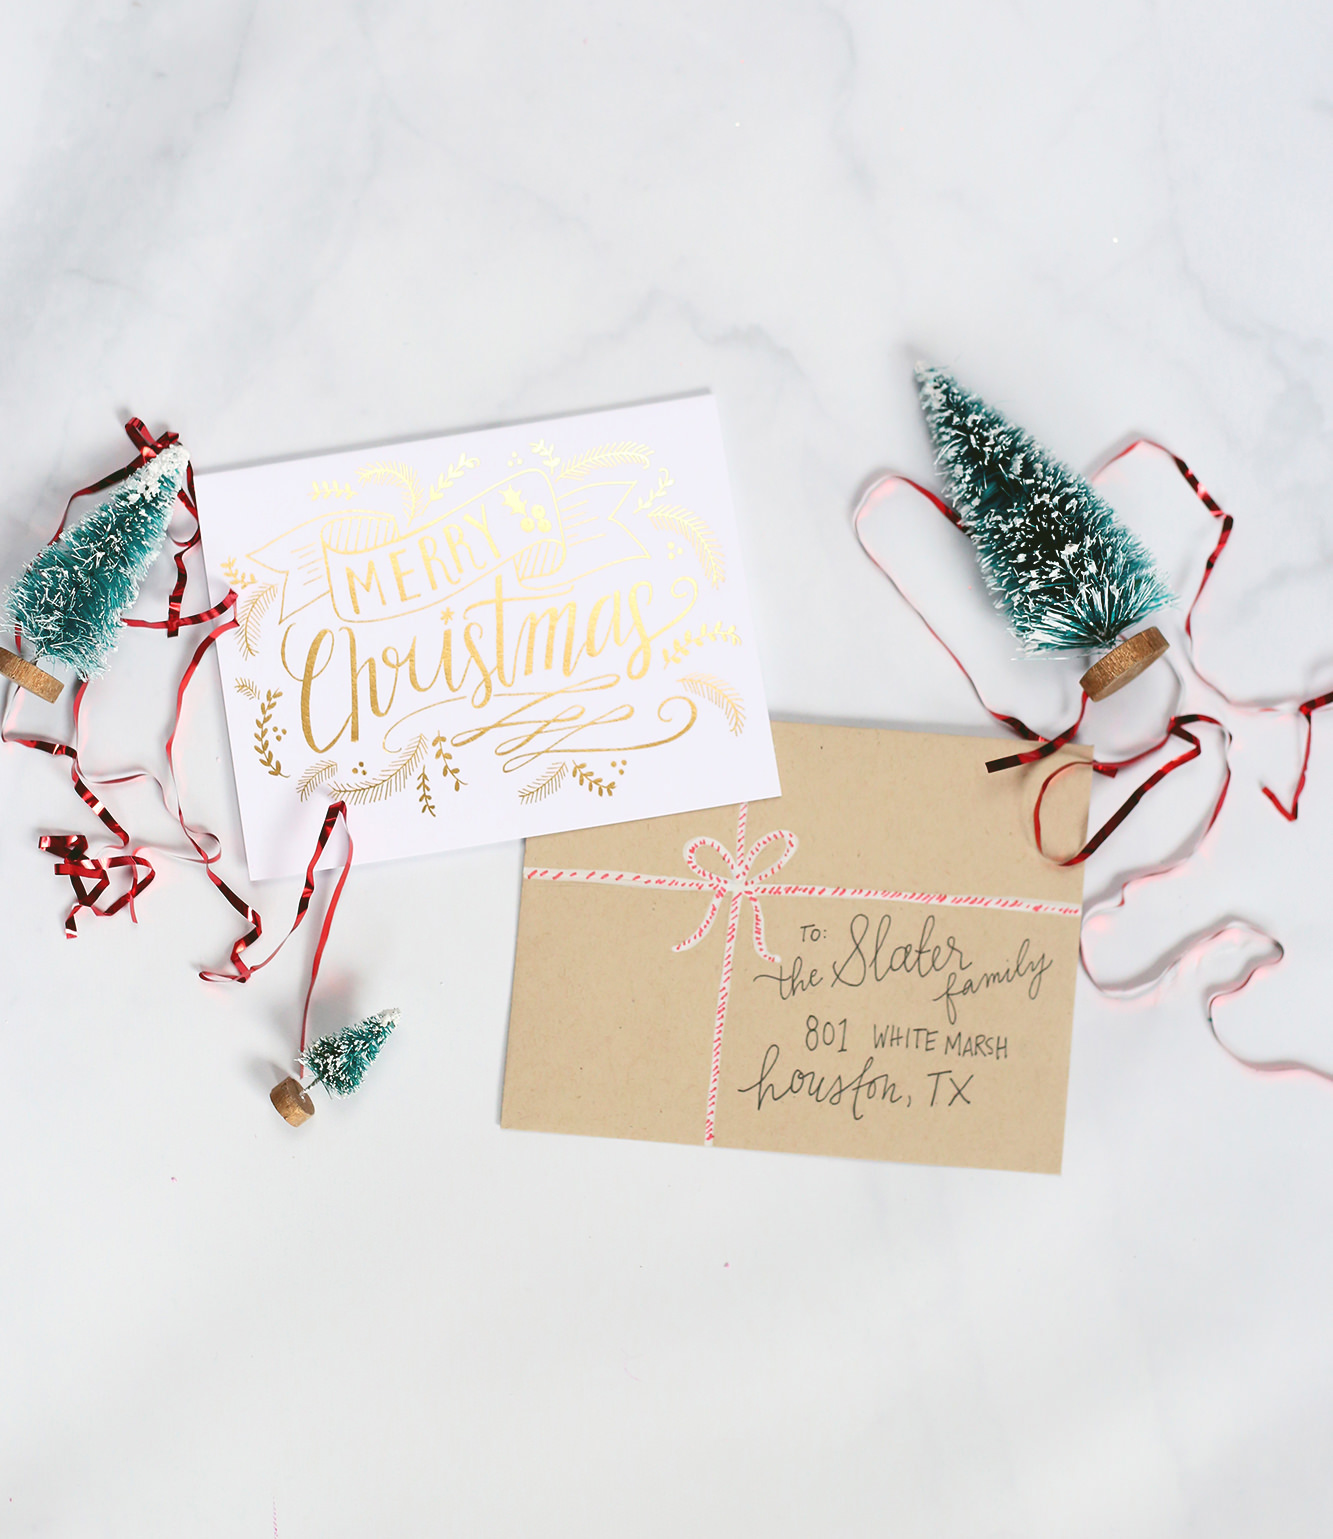 Christmas-inspired envelopes that are perfect for sending holiday wishes!